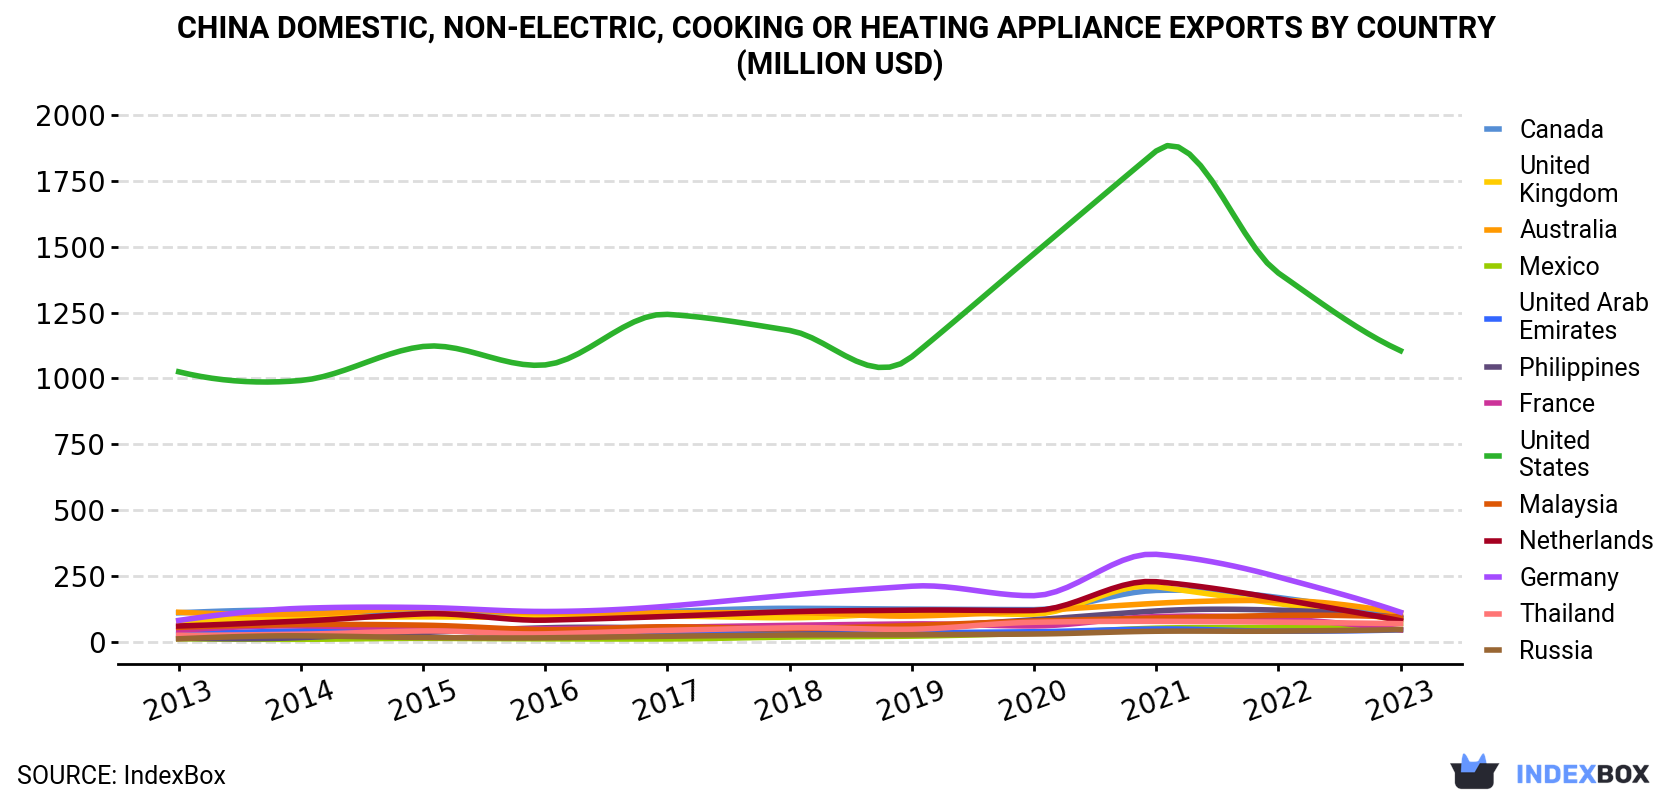 China Domestic, Non-Electric, Cooking Or Heating Appliance Exports By Country (Million USD)